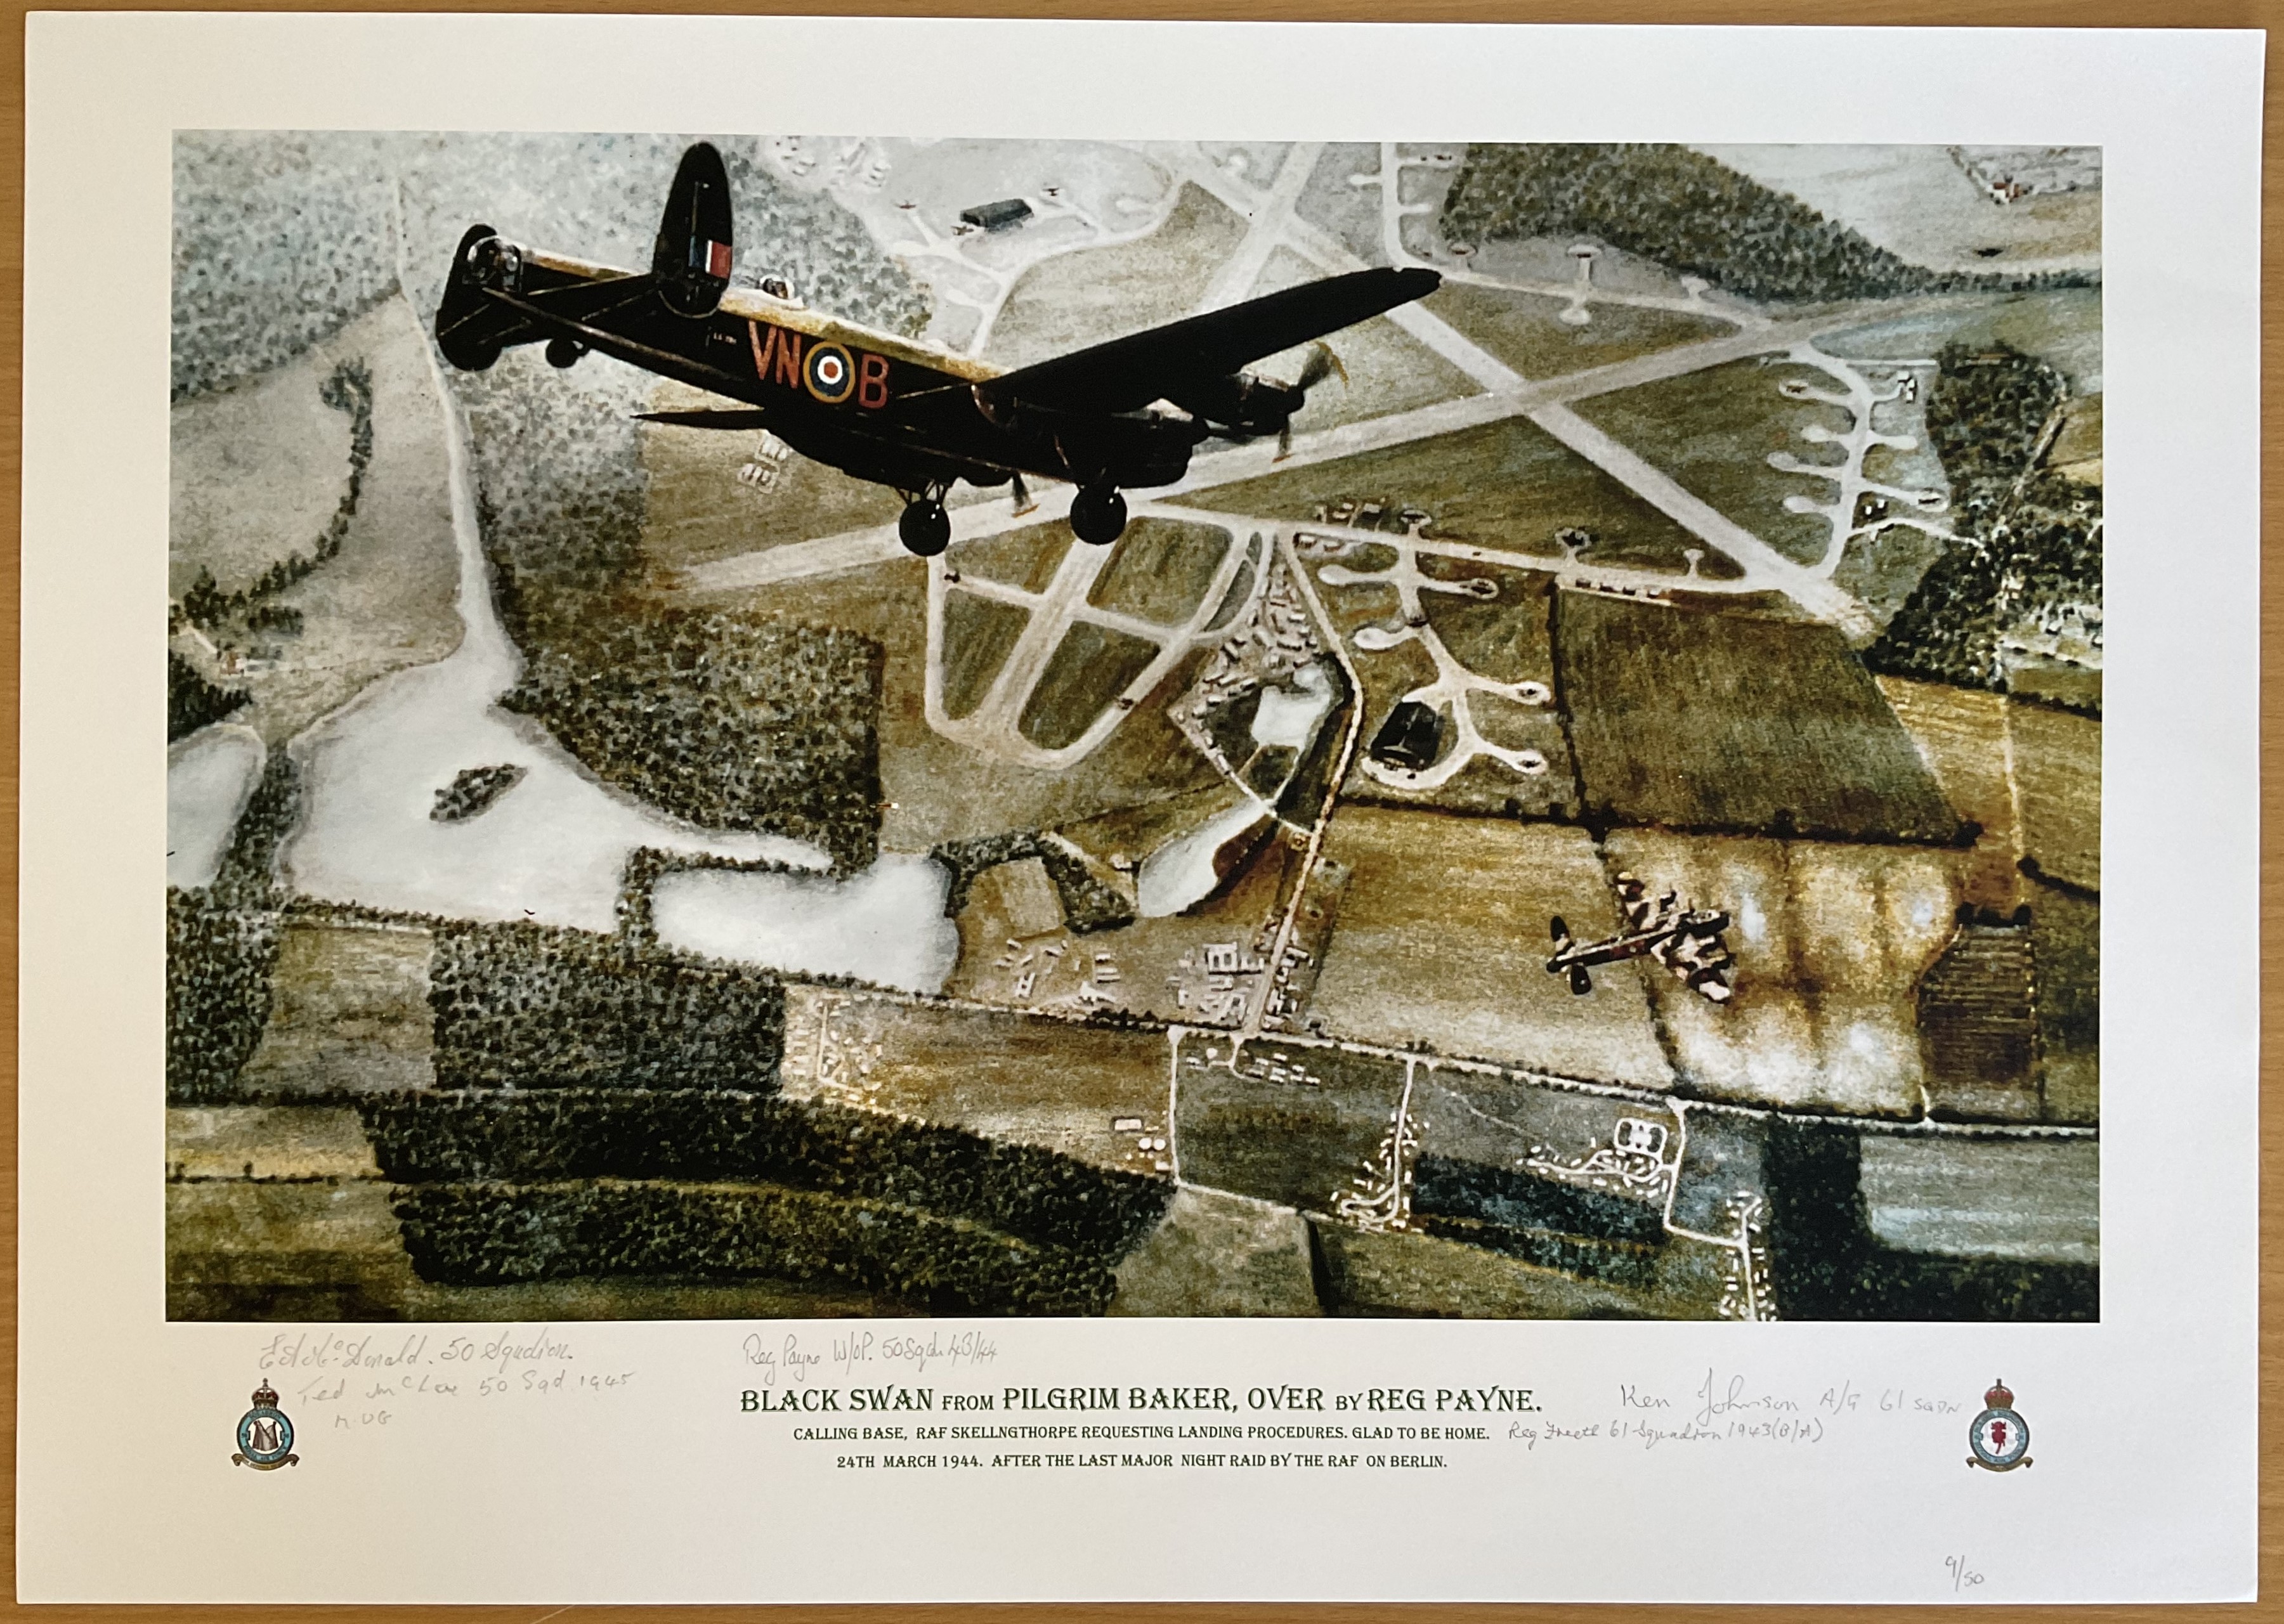 B 17 Bomber of the 384th USAAF by Reg Payne print. Signed by Teddy Kirkpatrick. Numbered 32 of 60.